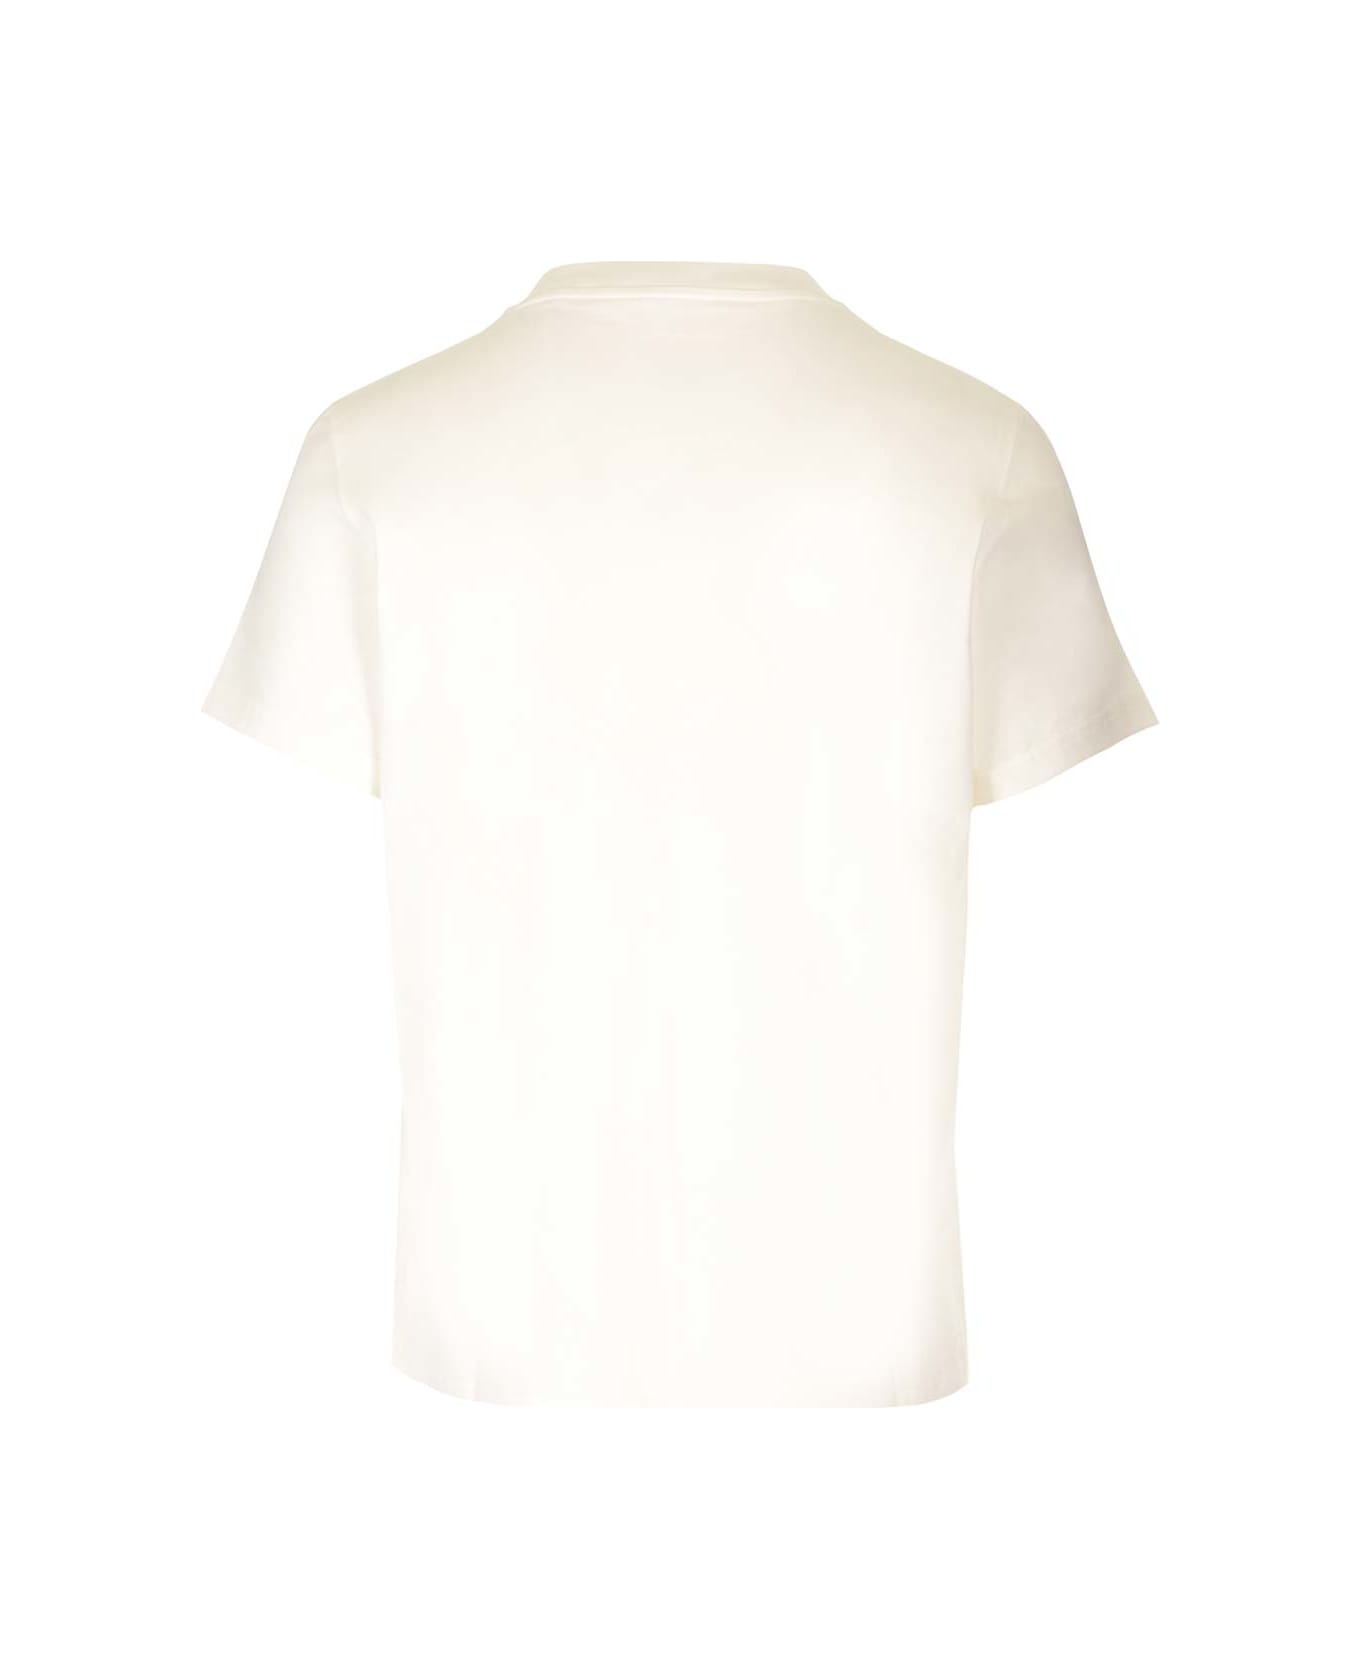 Courrèges Straight Fit T-shirt - Heritage White